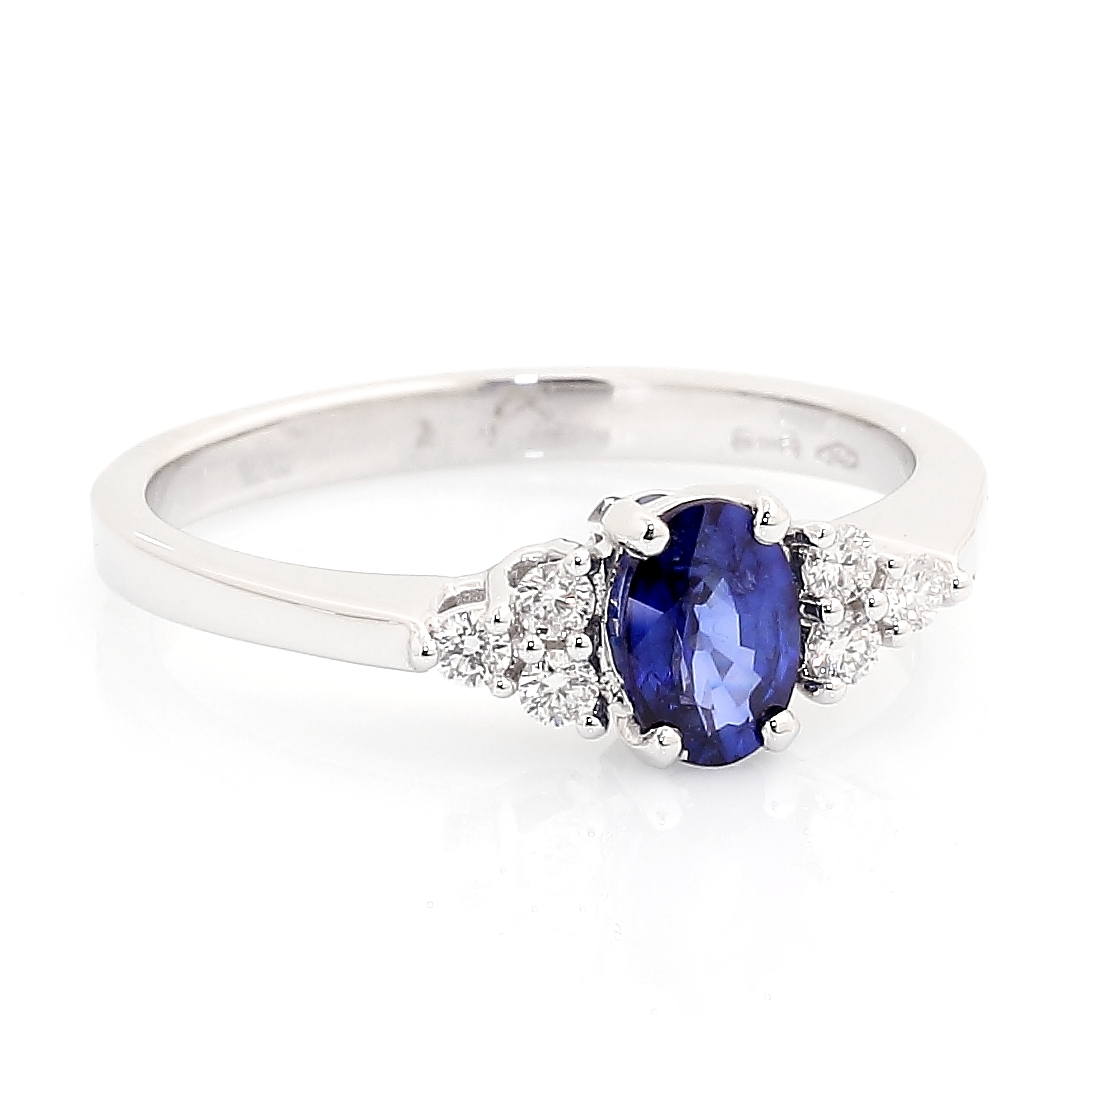 750 Mill. White Gold Ring with 0,12 Ct. Diamonds and 0,57 Ct. Sapphire